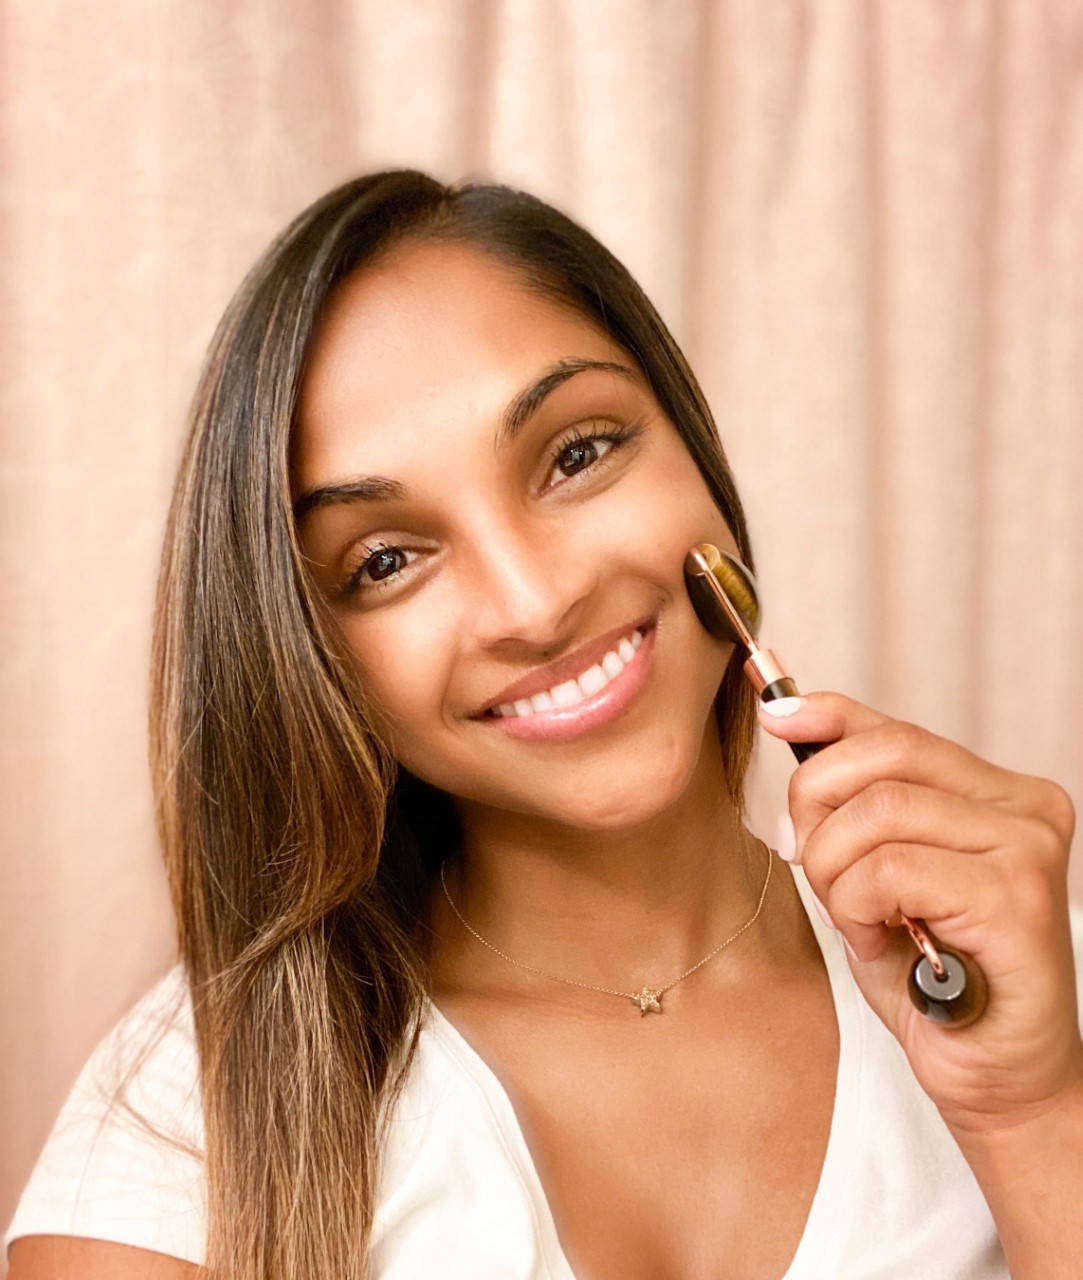 Anjali uses a Whimsy + Wellness gemstone facial roller as part of her skincare routine